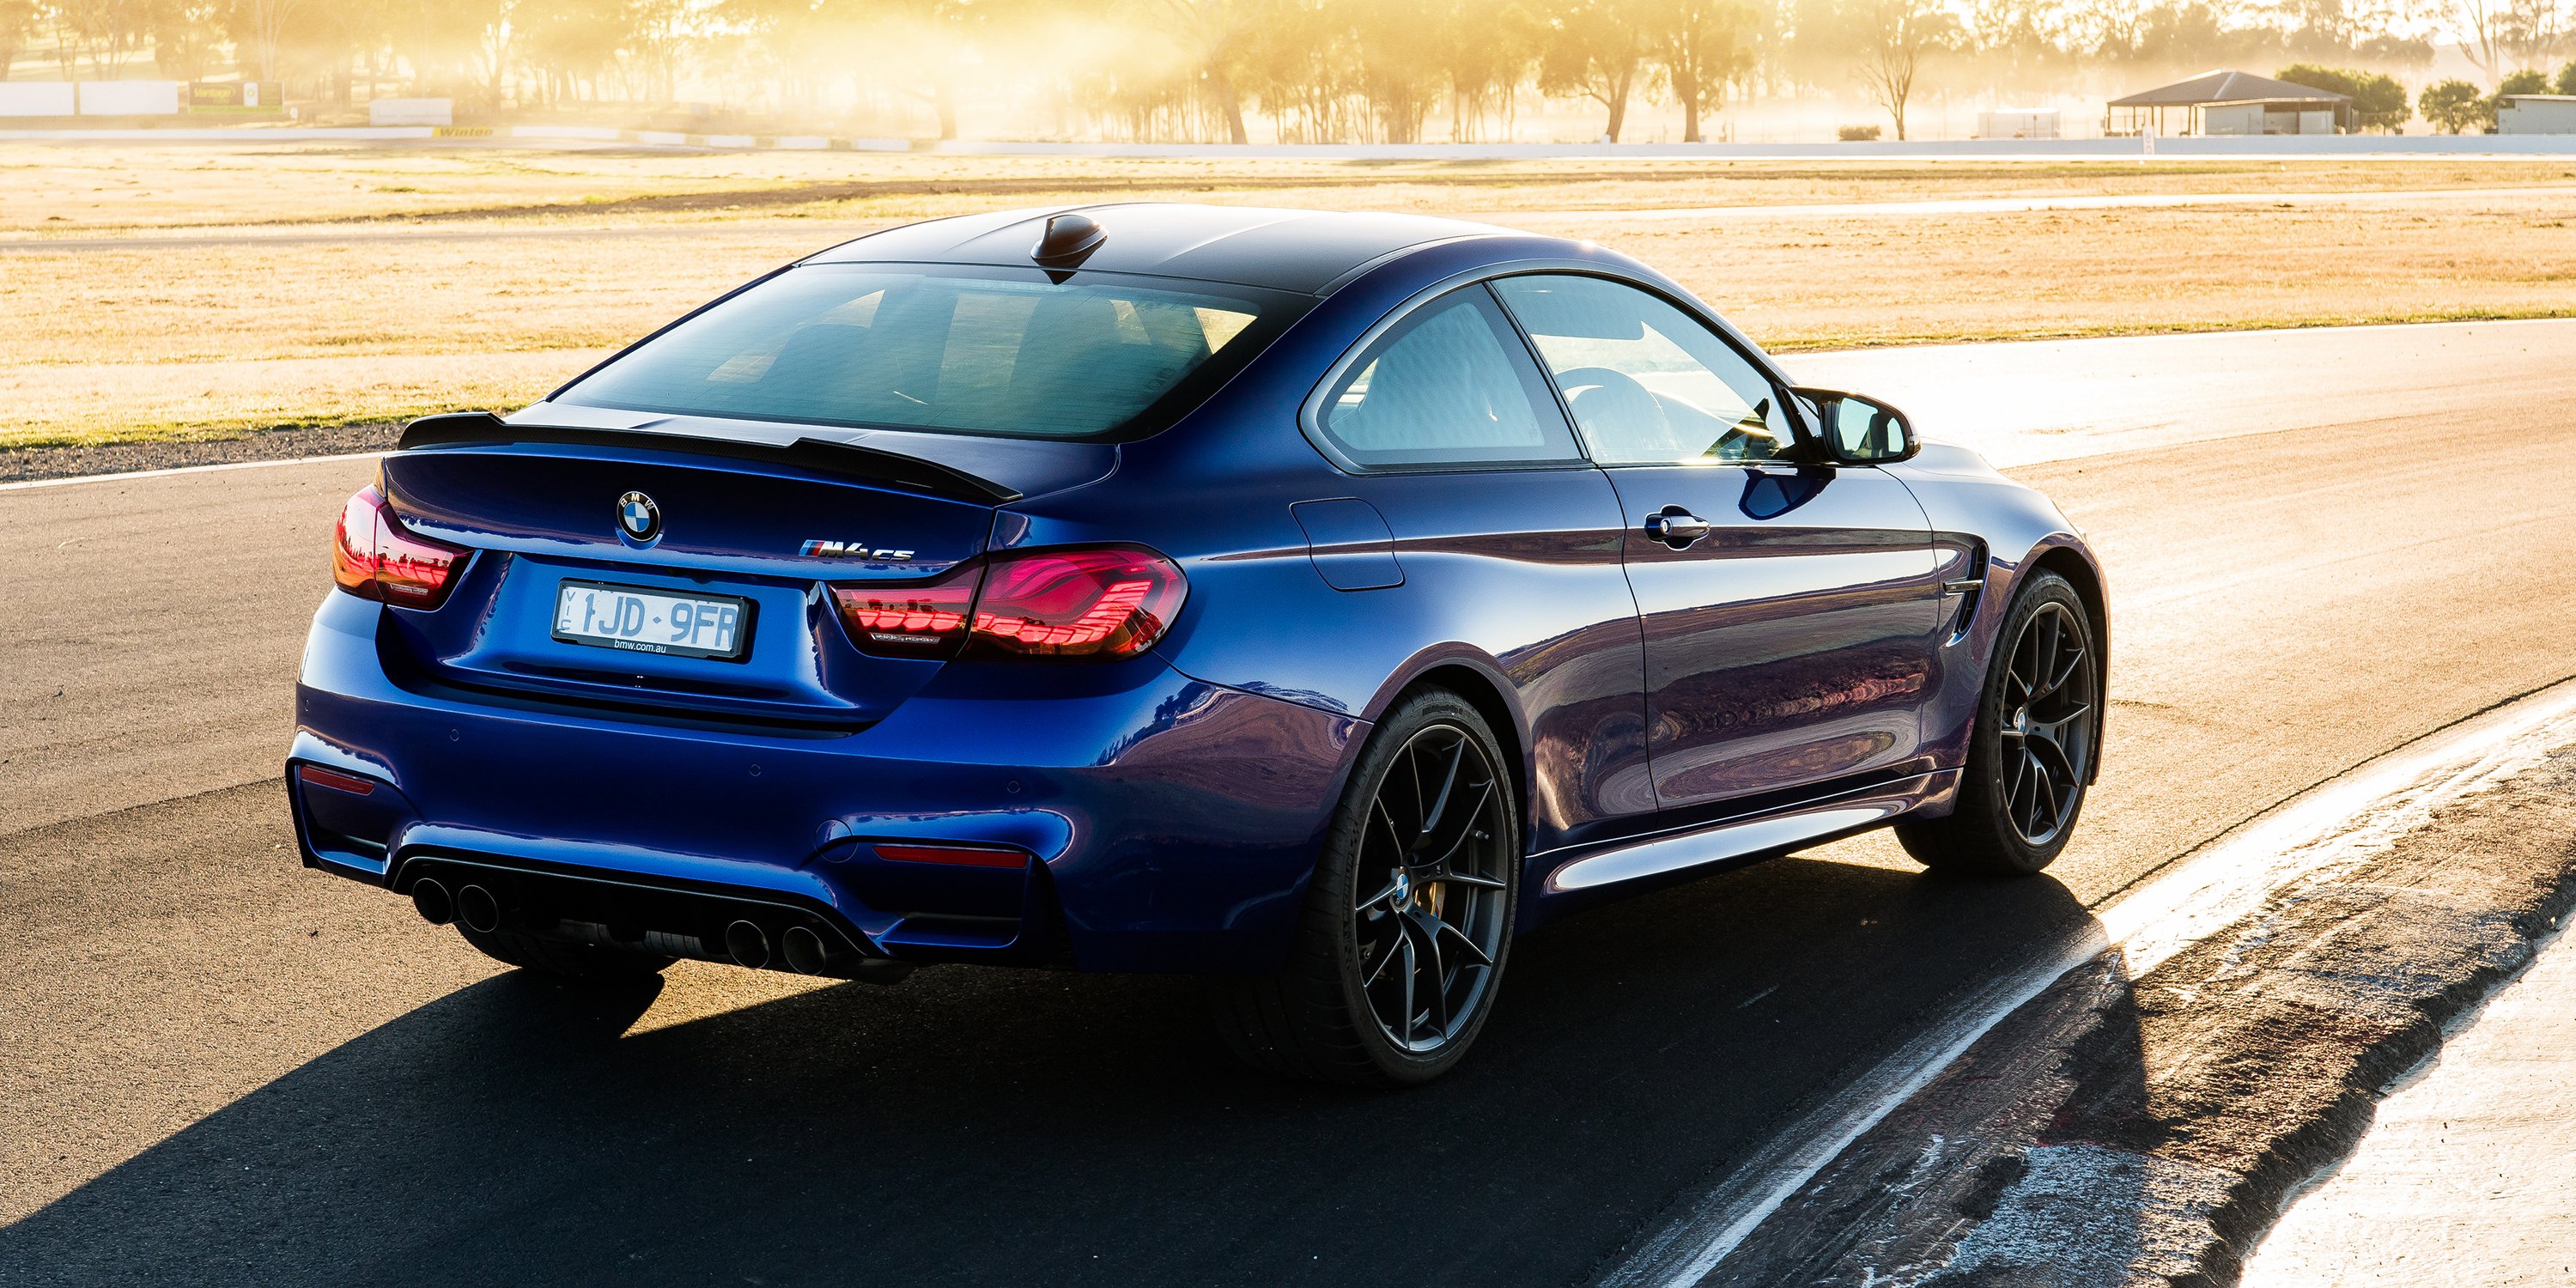 Unstoppable Power: The 2018 BMW M4 CS